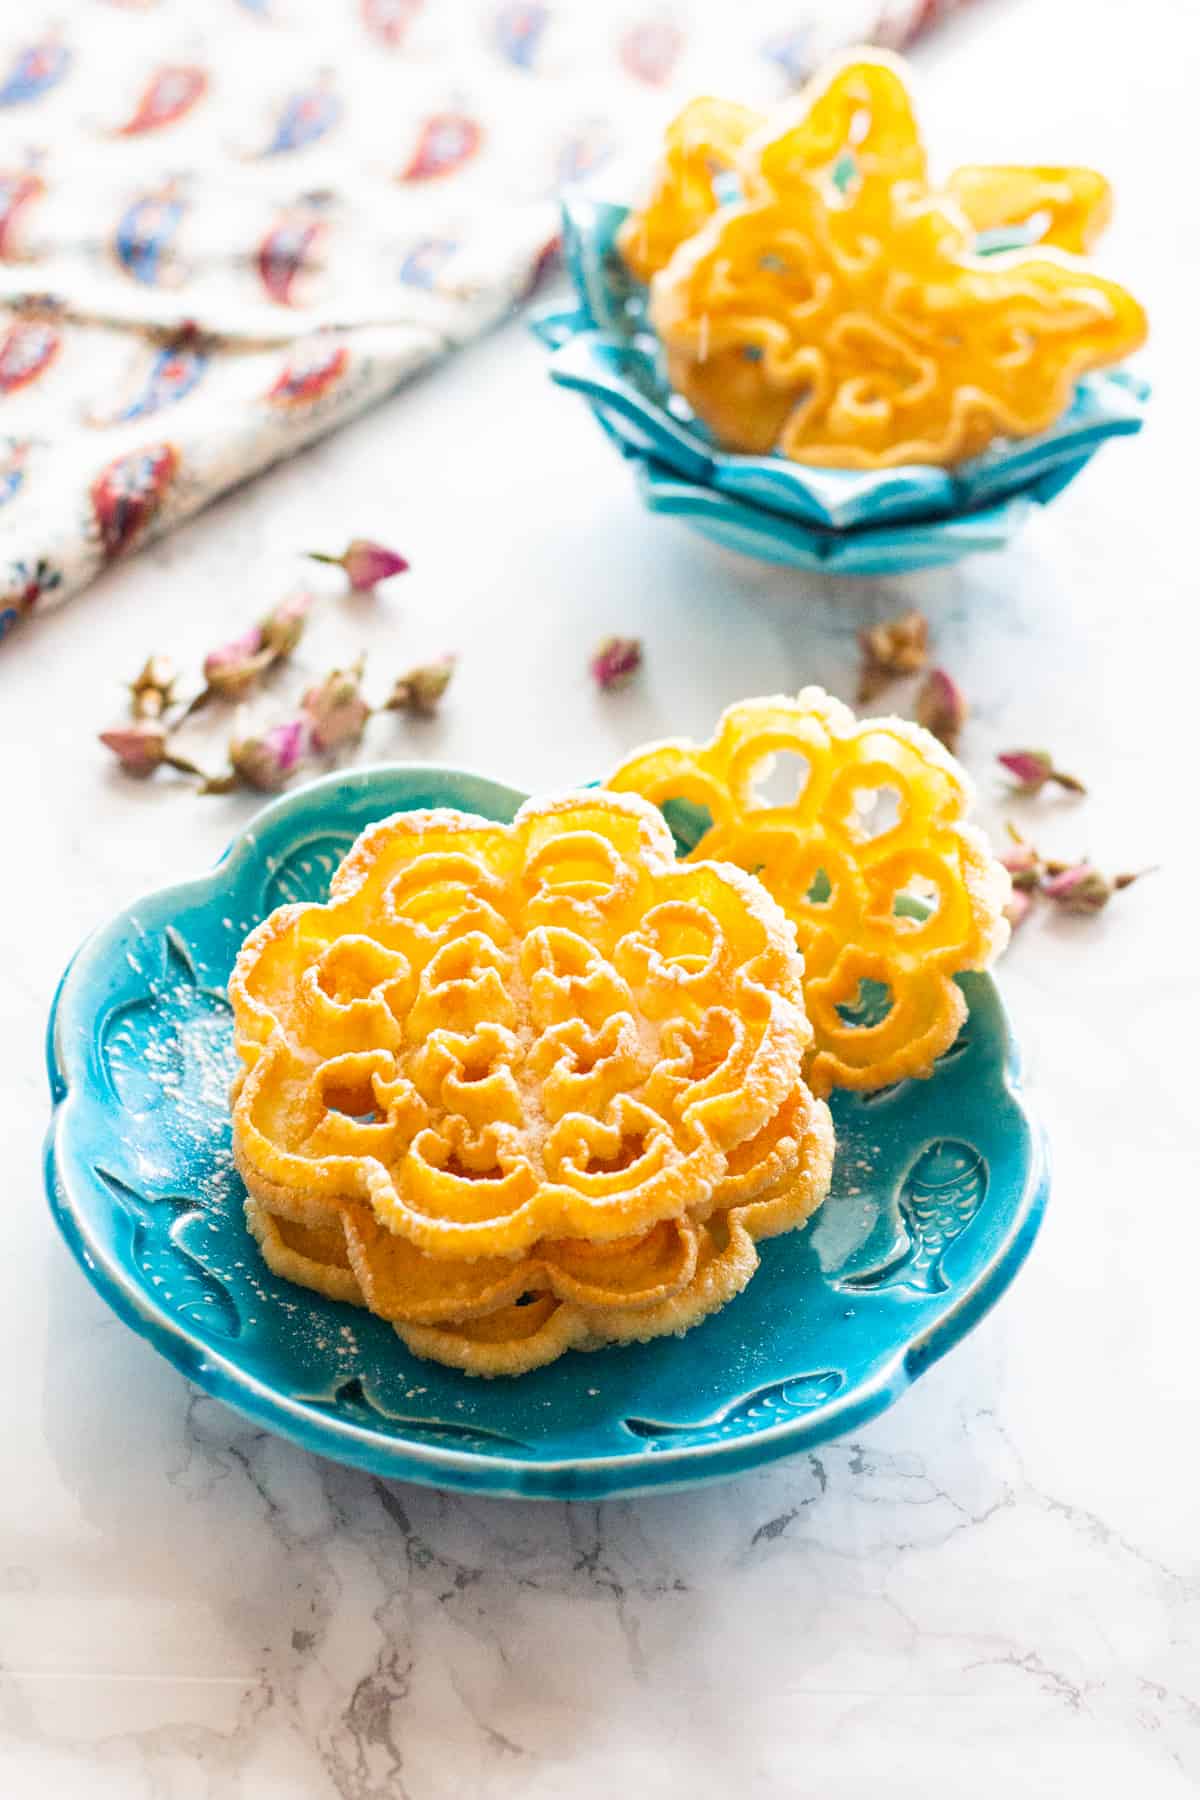 an panjereh - Persian rosettes is a traditional Persian cookie that is crisp and light. It's made of basic ingredients and once you find the technique, it is easy and fun to make! 